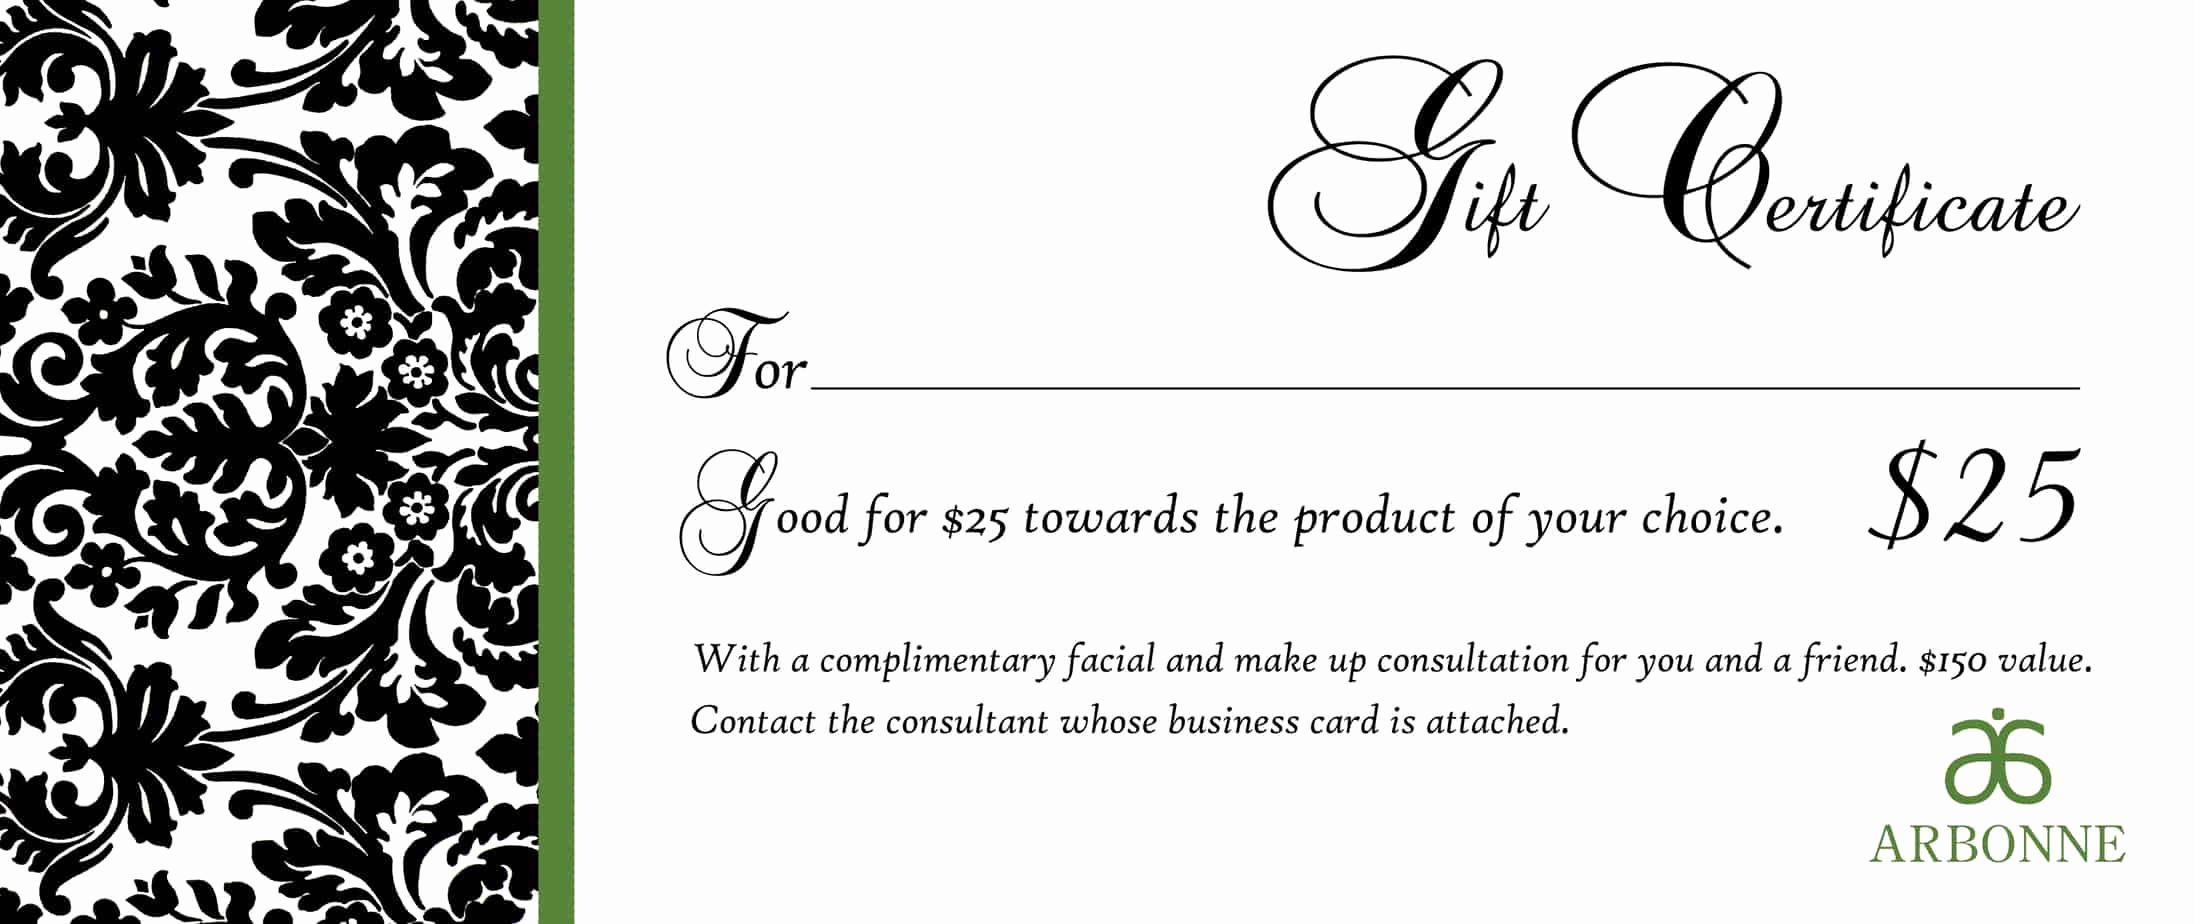 Sample Gift Certificate Template Inspirational 18 Gift Certificate Templates Excel Pdf formats